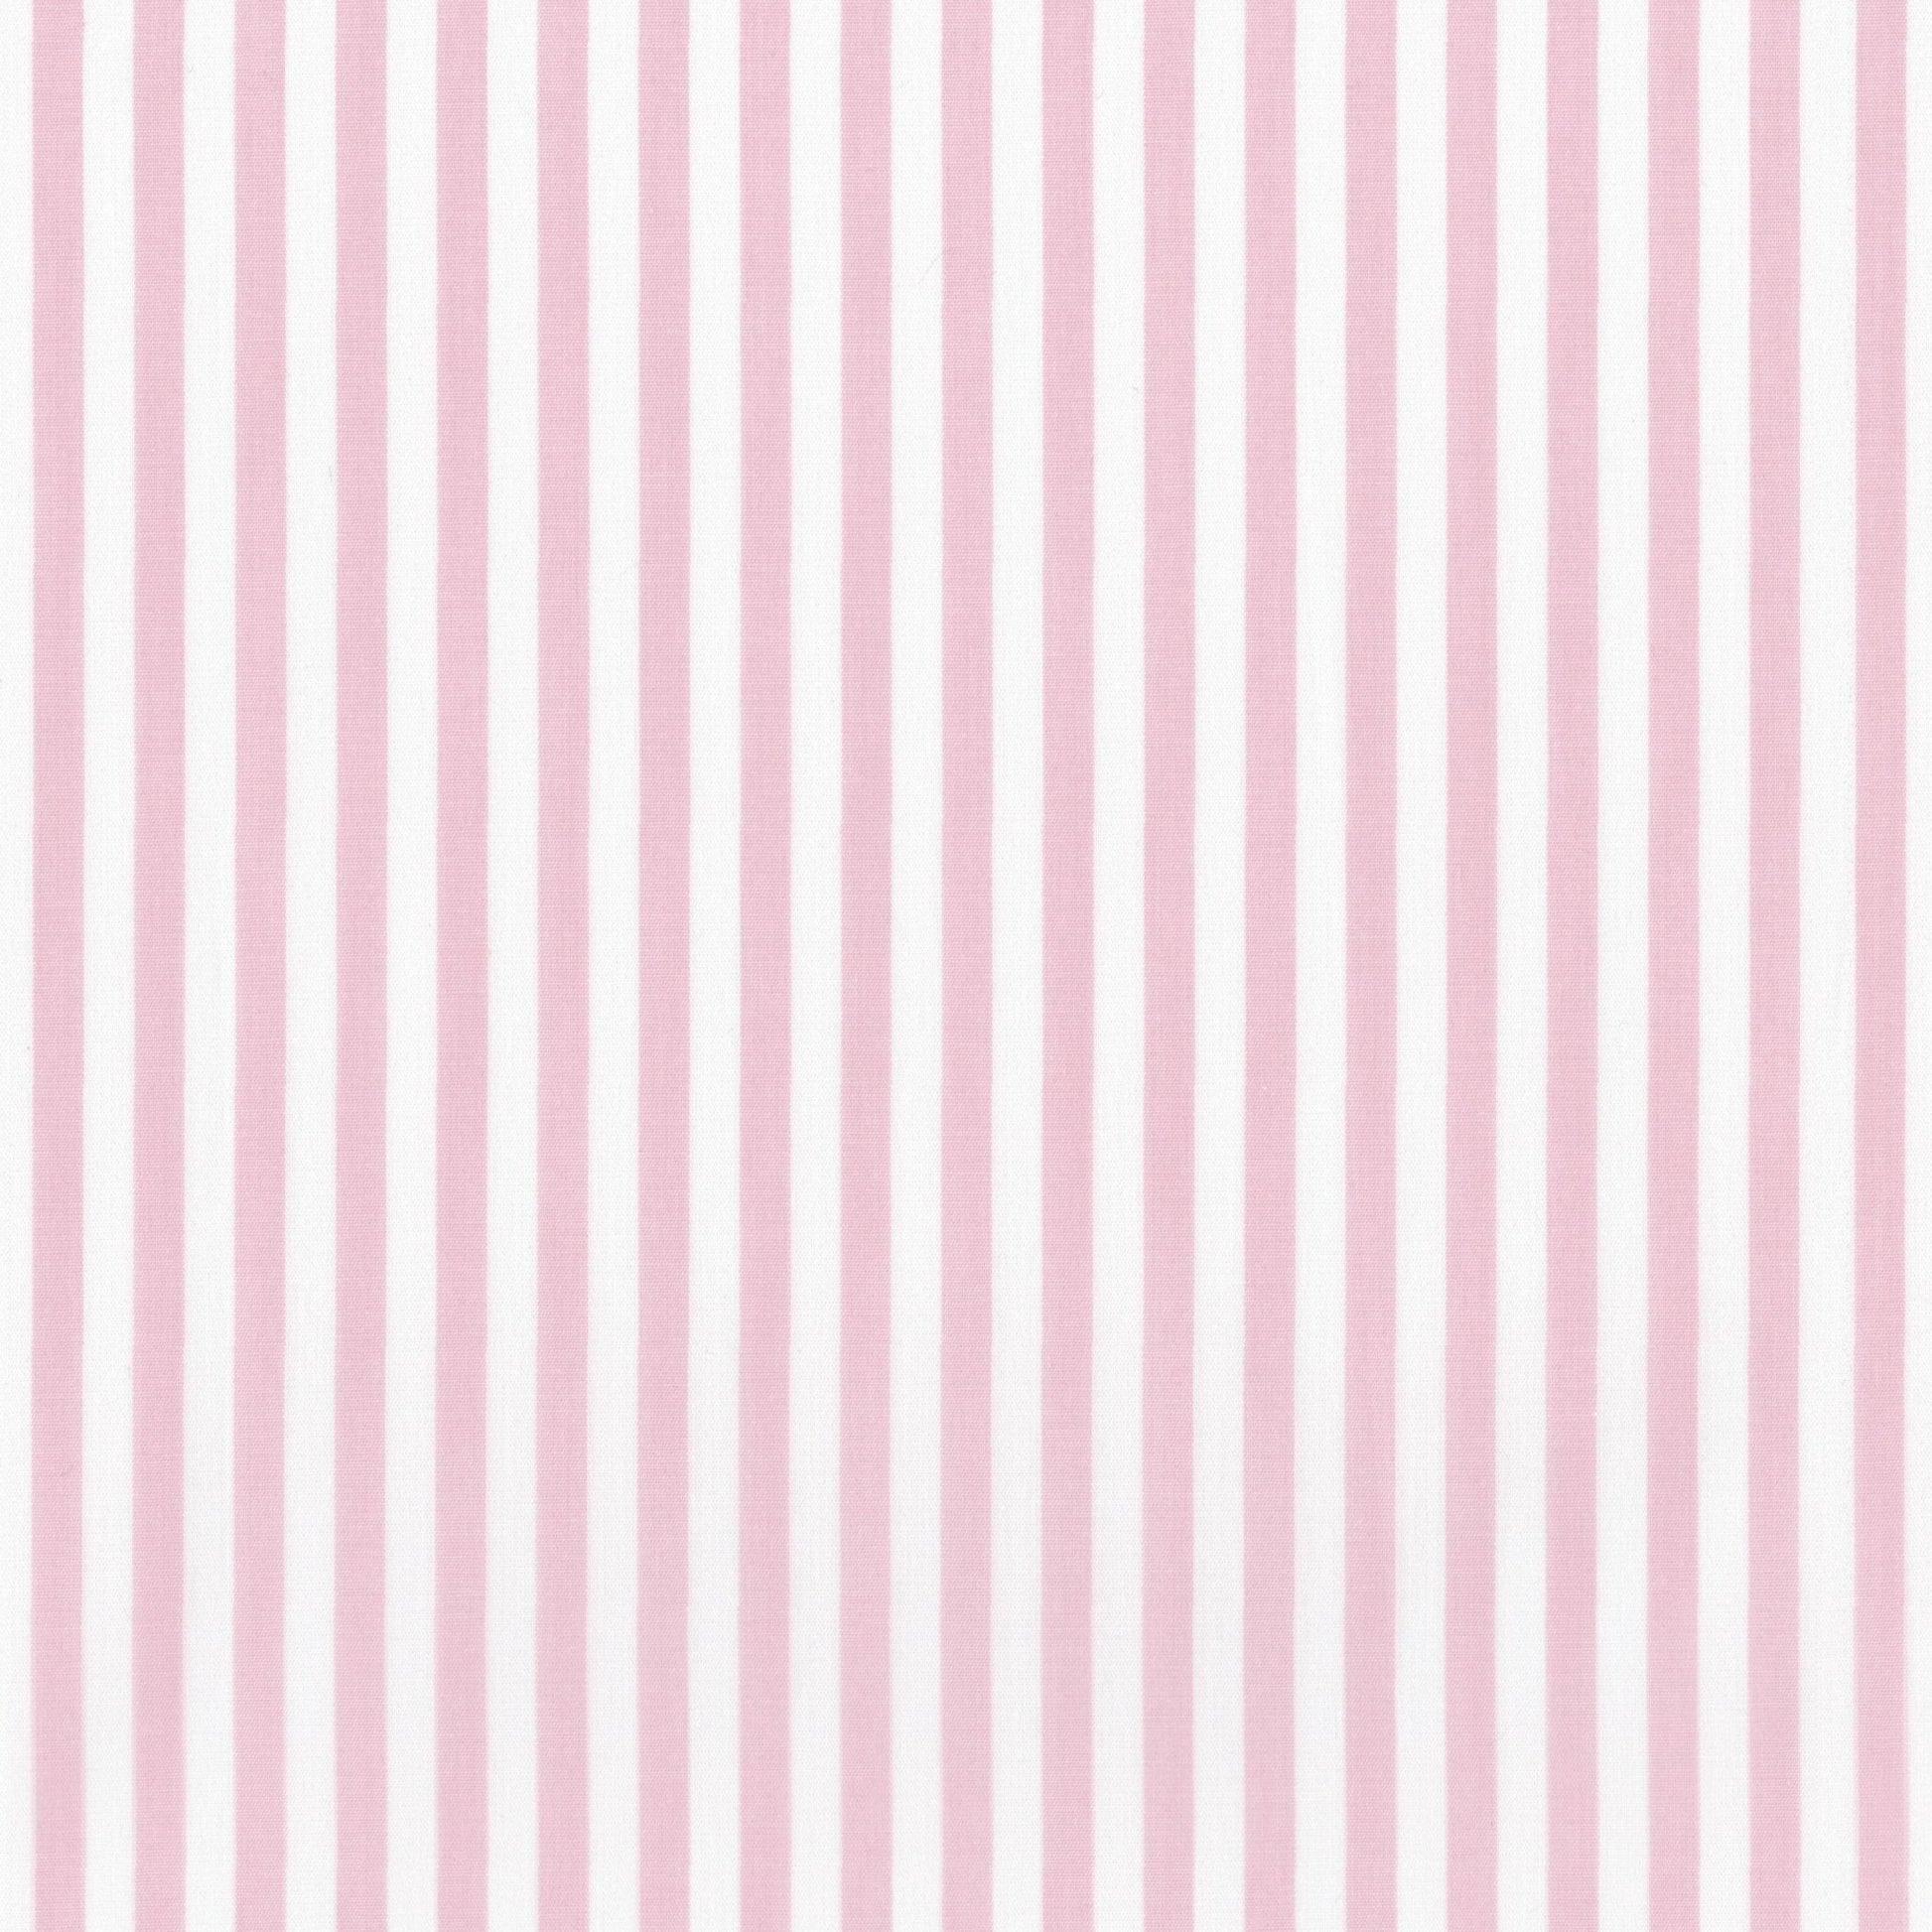 Baby Pink Stripe Swatch - New Arrivals Inc